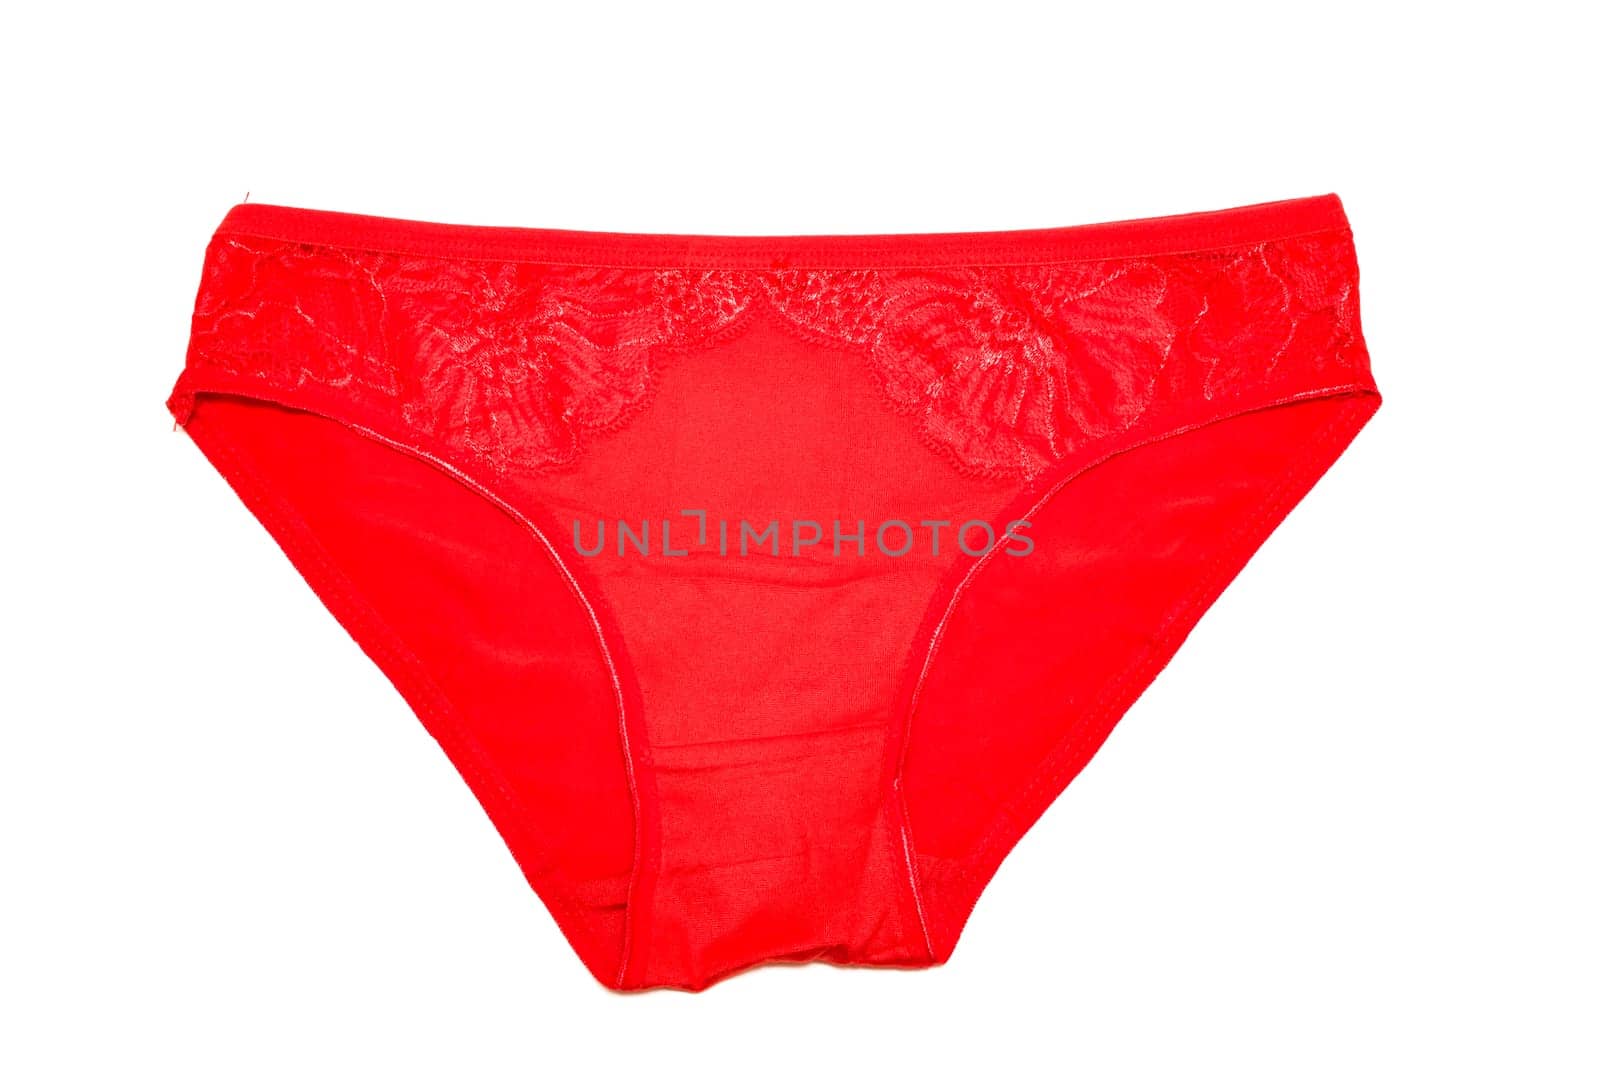 Red female underpants isolated on white background by Vera1703